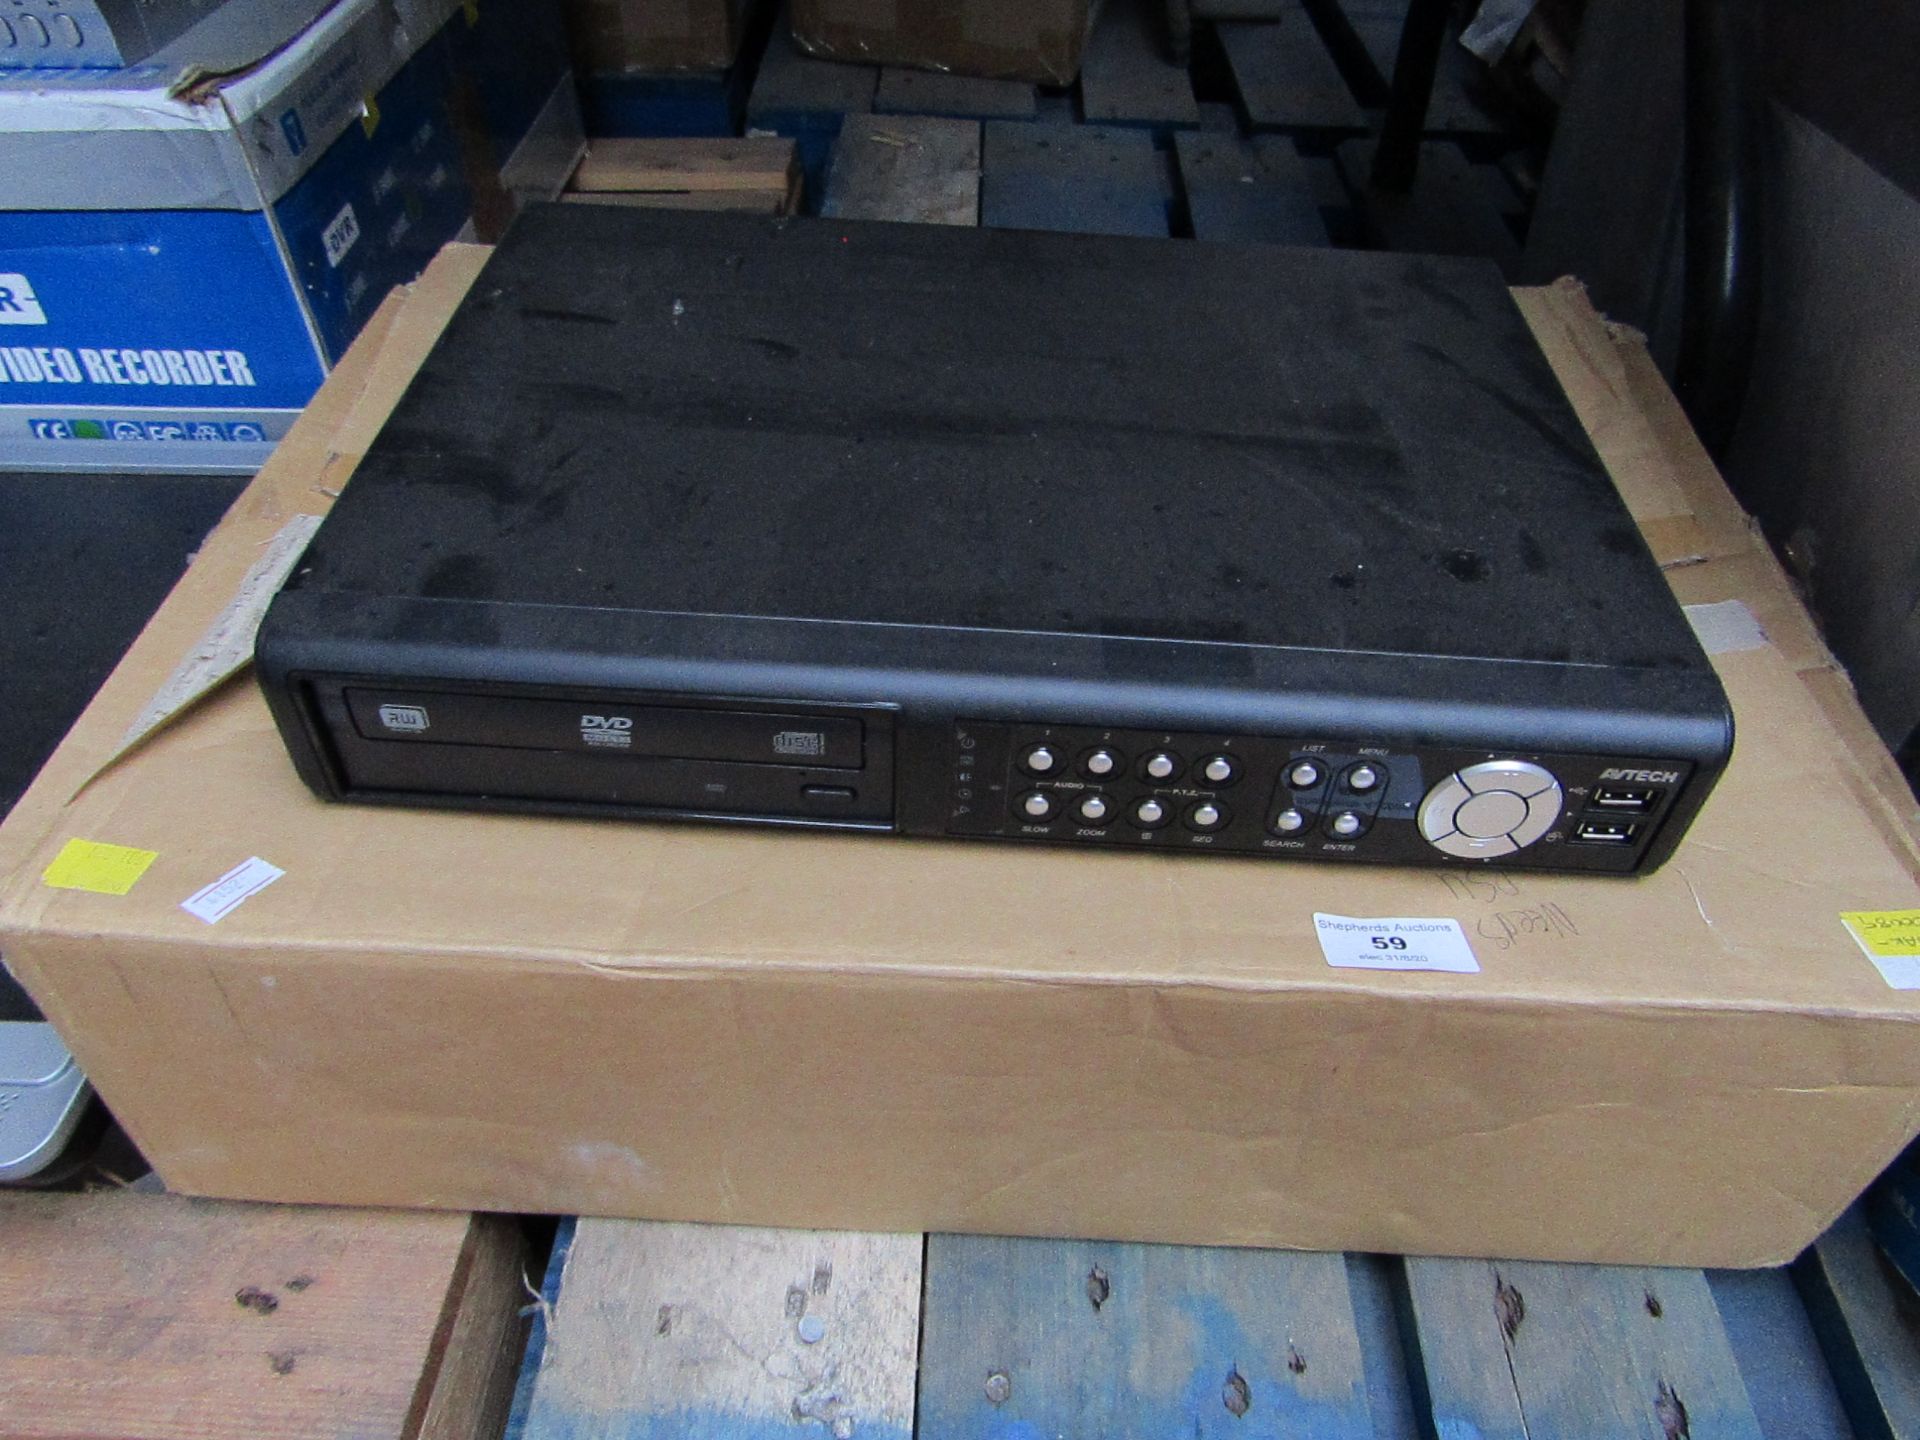 AvTech - 4 Channel DVR - Untested & Boxed.